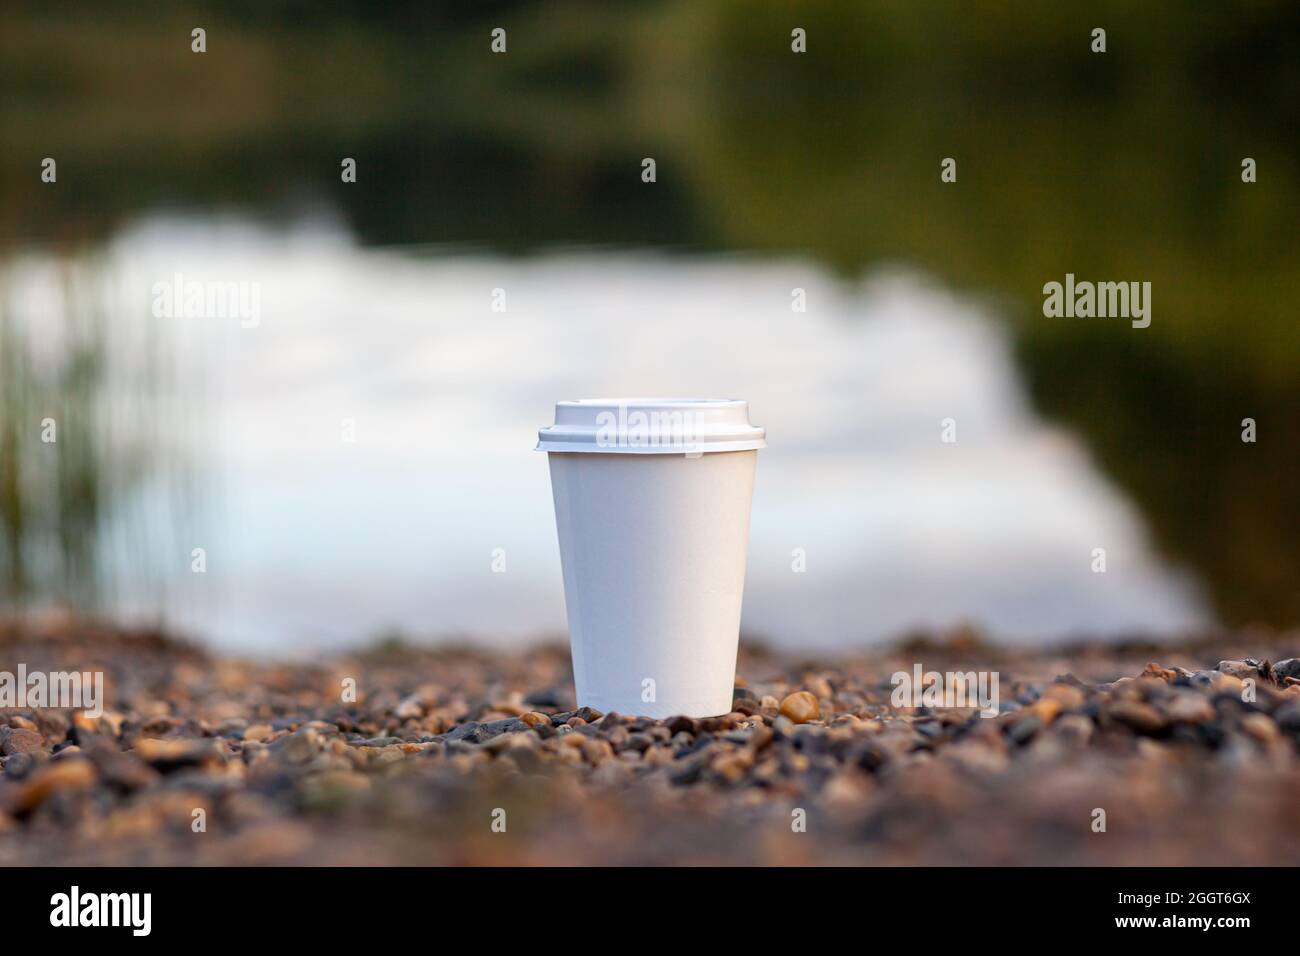 https://c8.alamy.com/comp/2GGT6GX/a-white-paper-cup-of-coffee-or-tea-stands-on-the-rocky-shore-of-the-lake-a-mug-of-hot-drink-on-a-pebble-beautiful-nature-background-of-the-lake-in-t-2GGT6GX.jpg